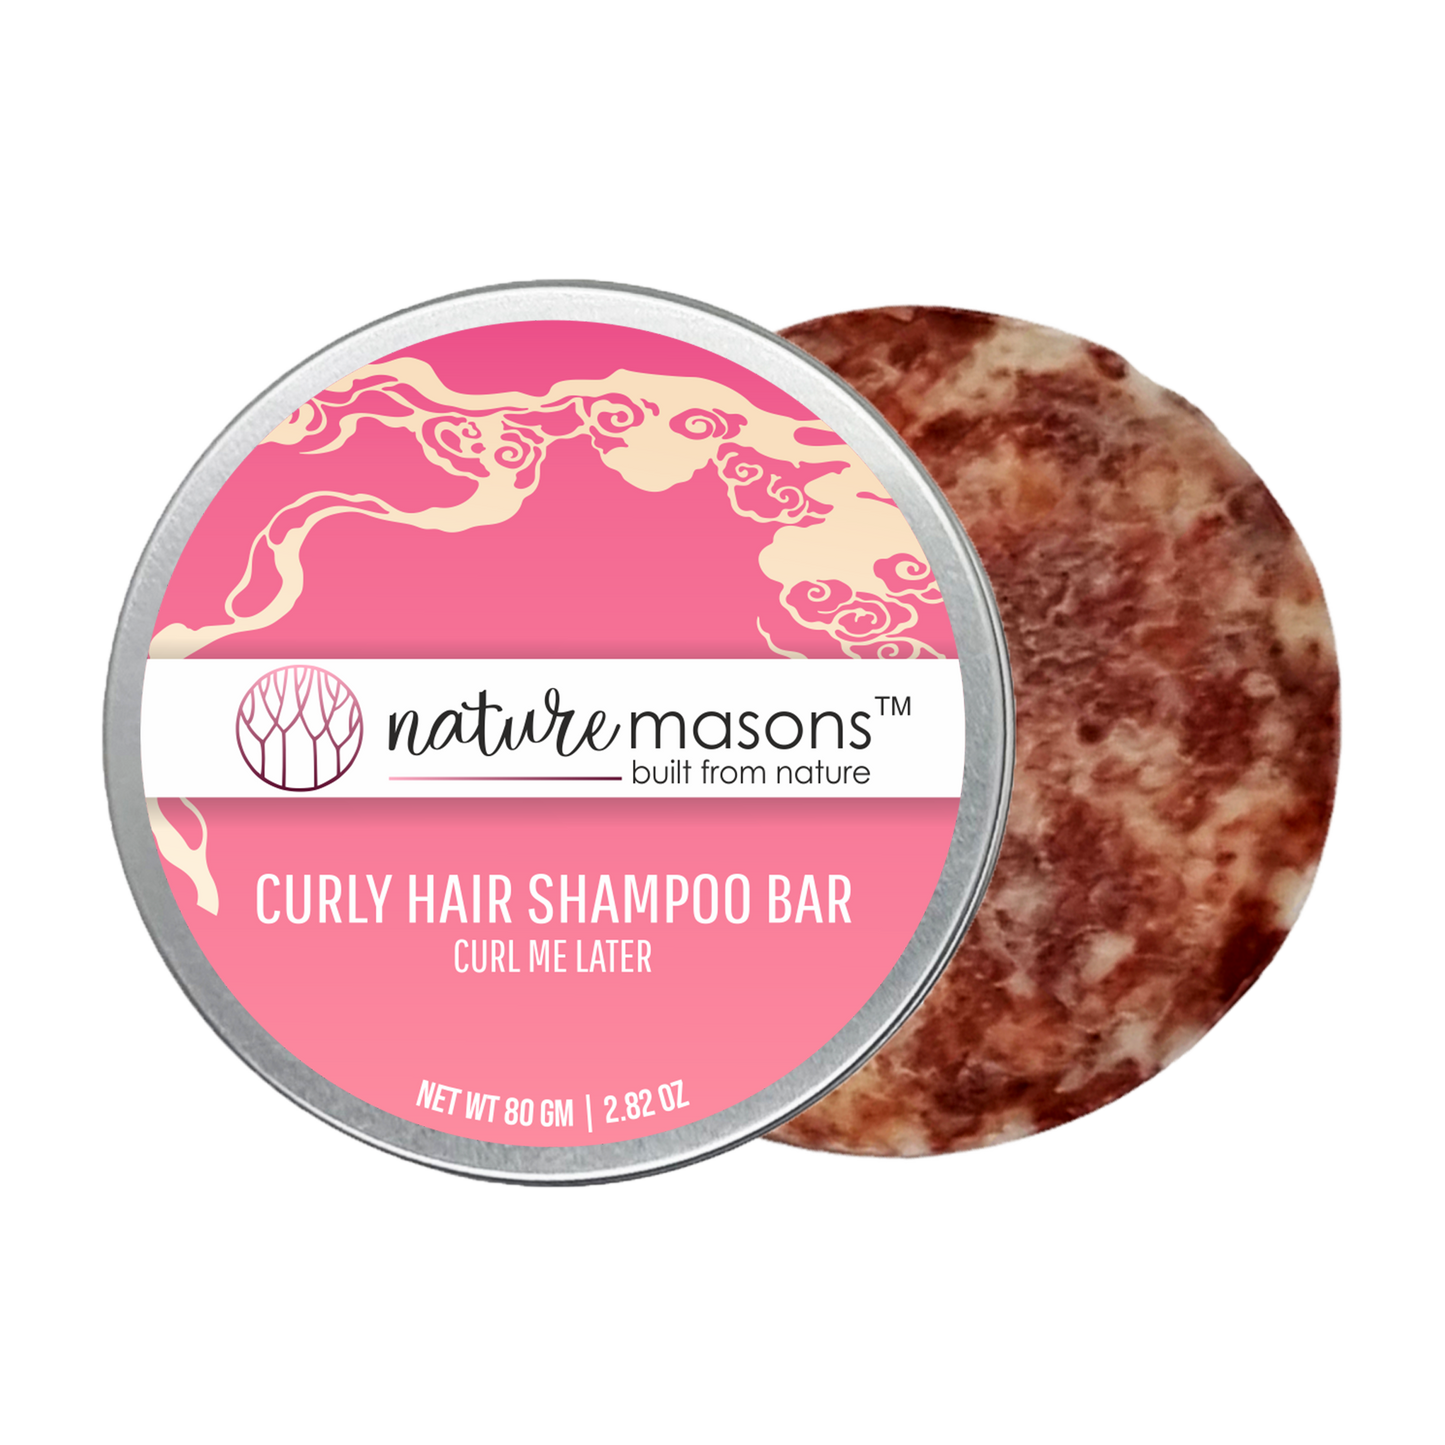 Smooth Curlminal - Curly Hair Conditioner Bar The Nature Masons